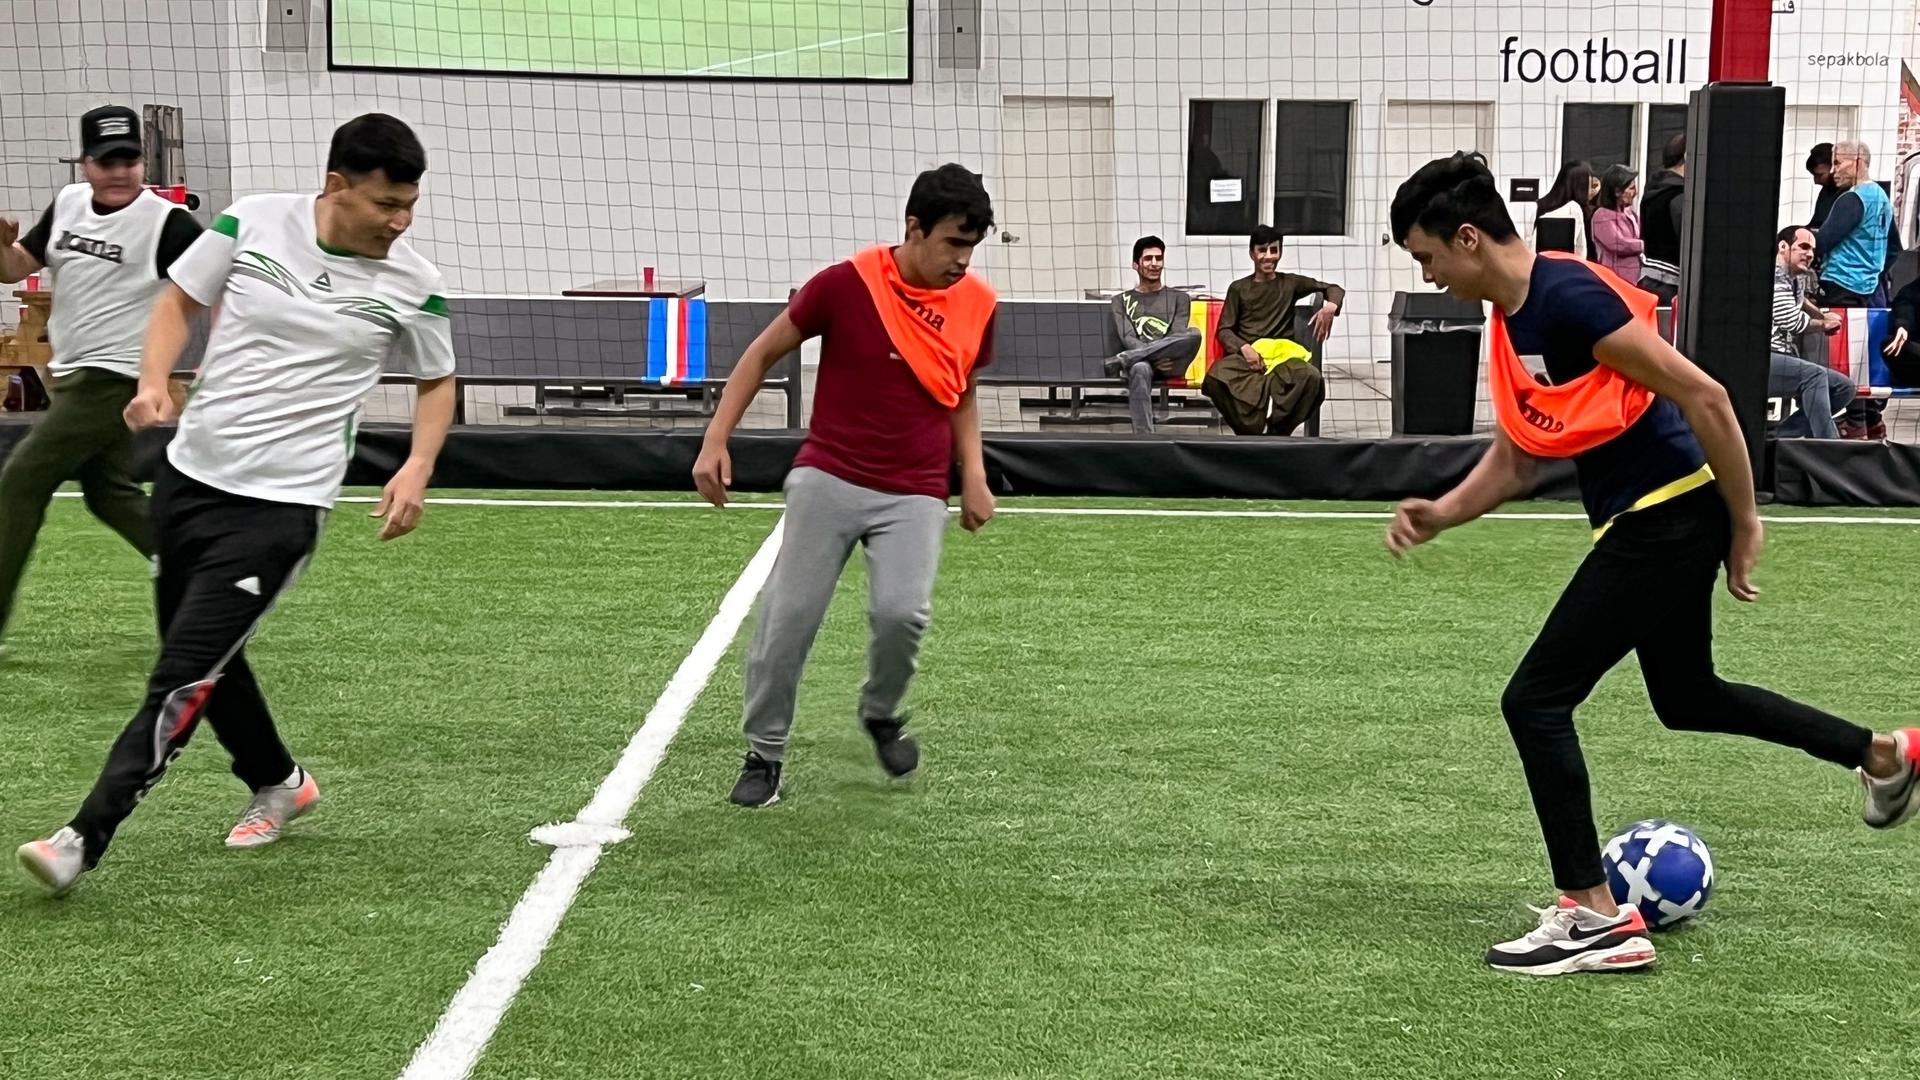 Some of the older Afghan children play soccer at STL Futbol Club on a recent Saturday. The weekly program will extend through the end of April.